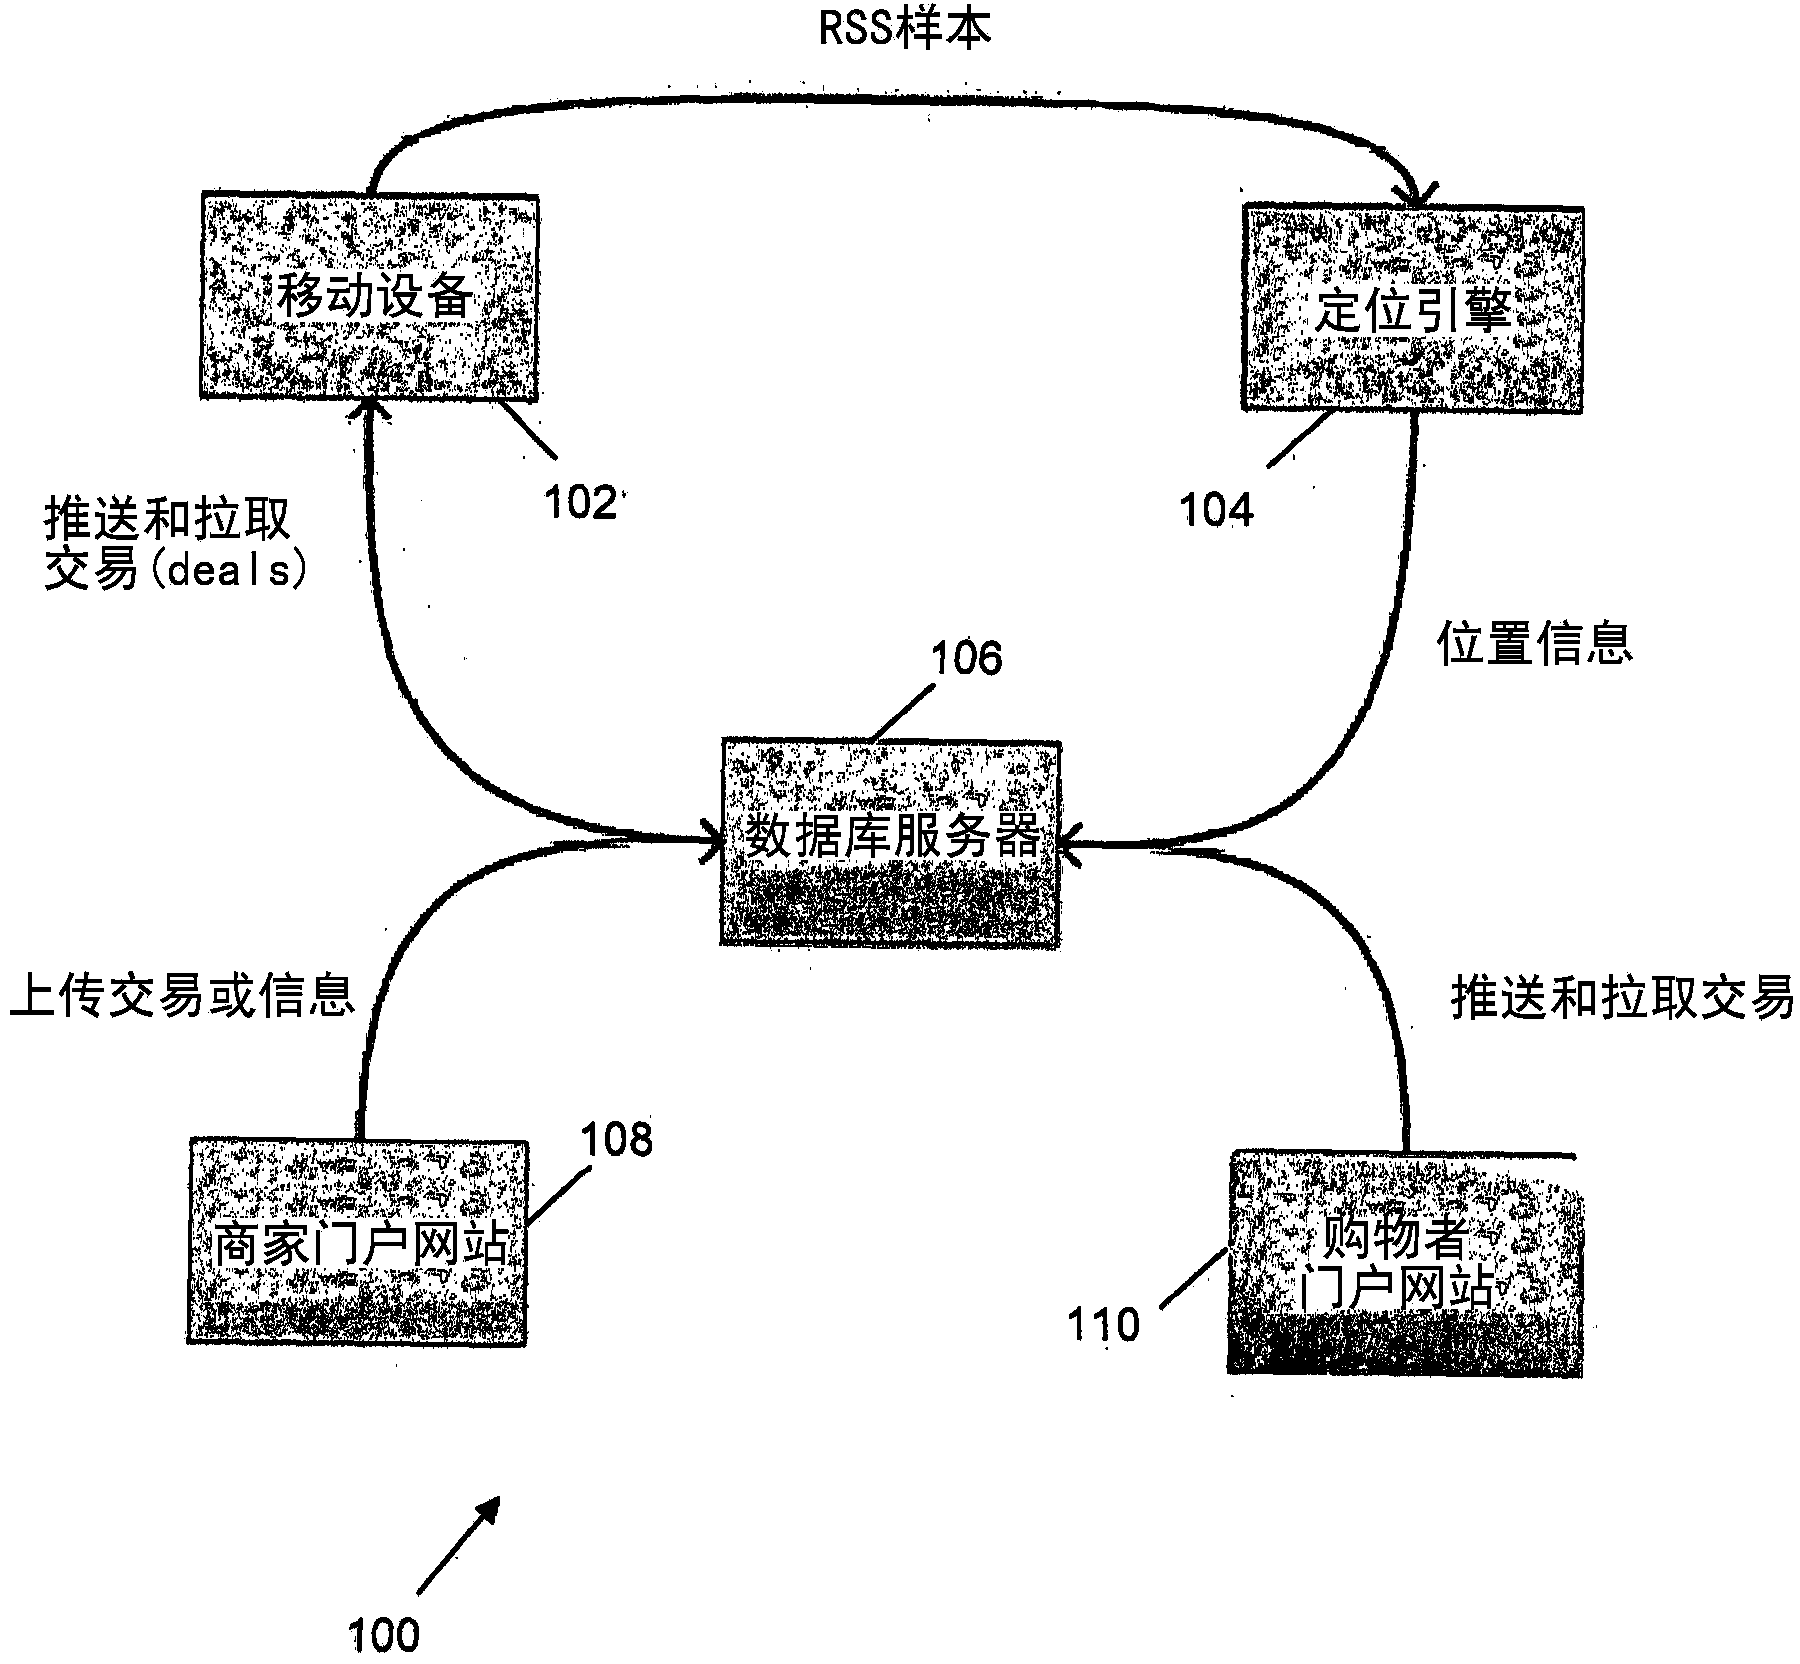 A method and apparatus for determining location information of a position in a multi-storey building